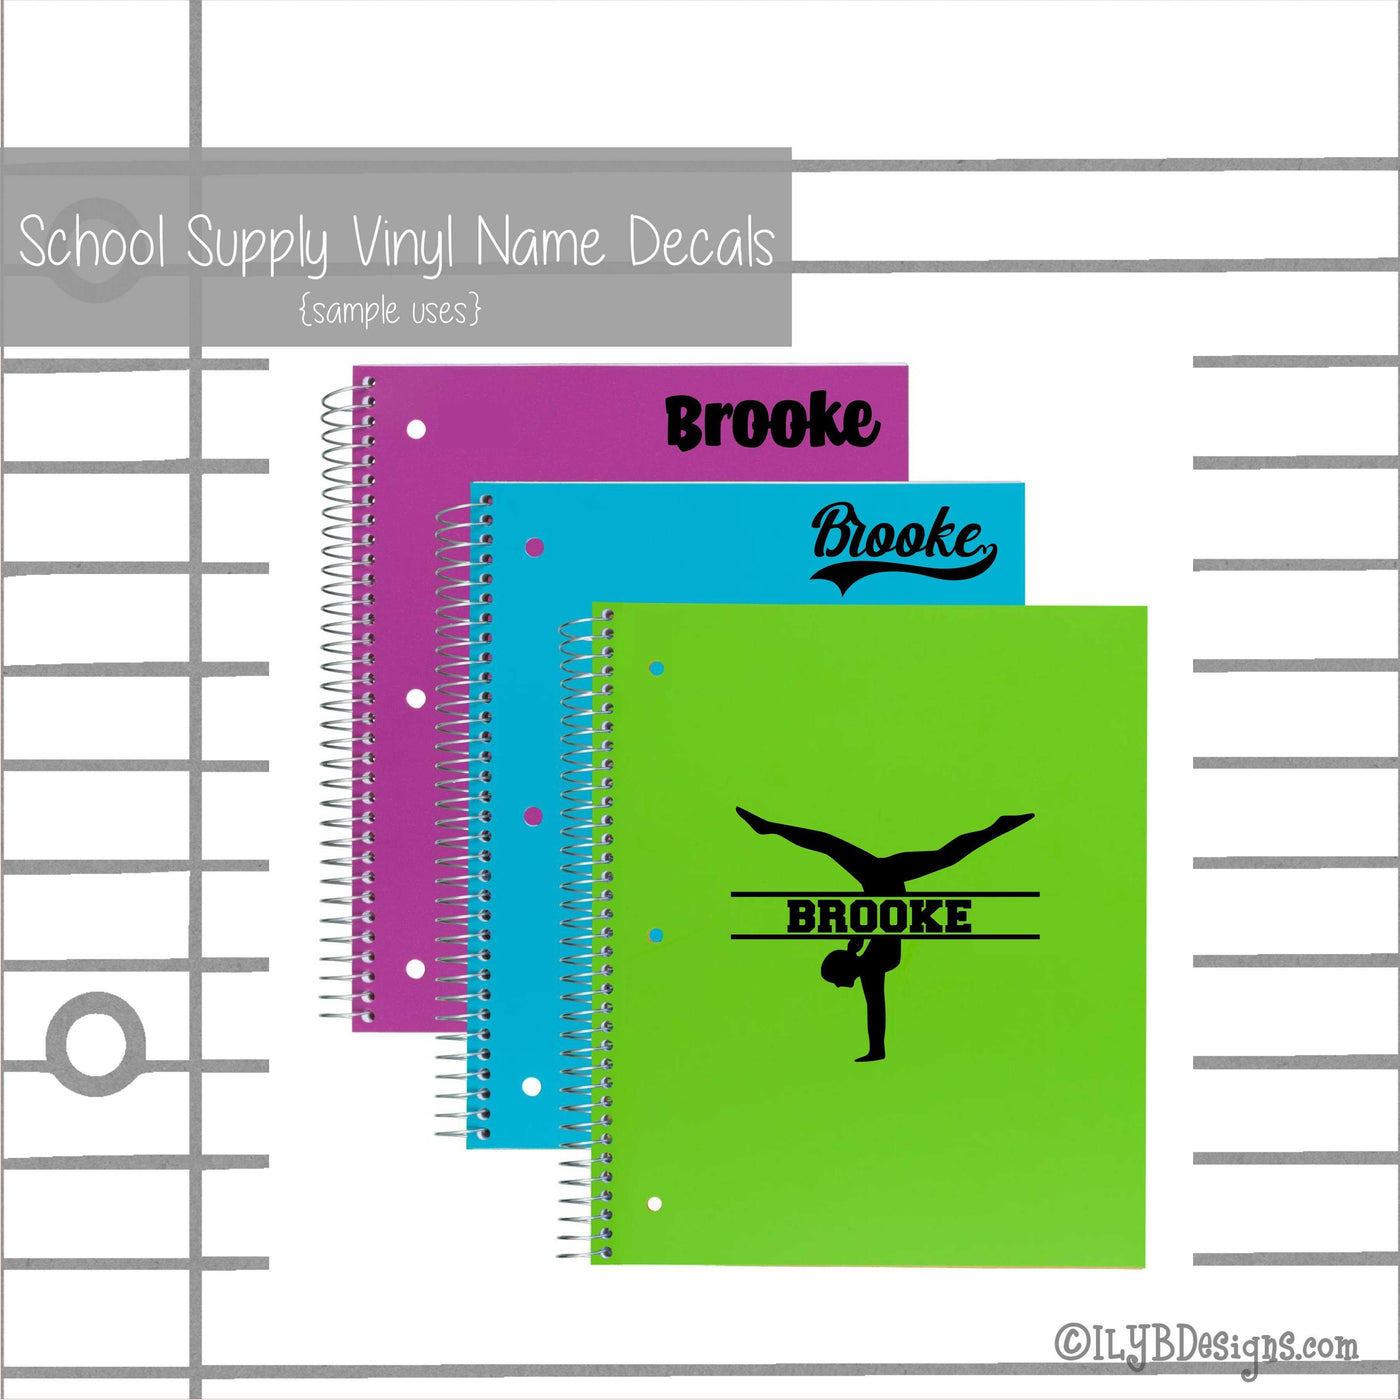 Princess Back to School Labels - School Supply Labels for Girls - Back to School Name Decals - ILYB Designs